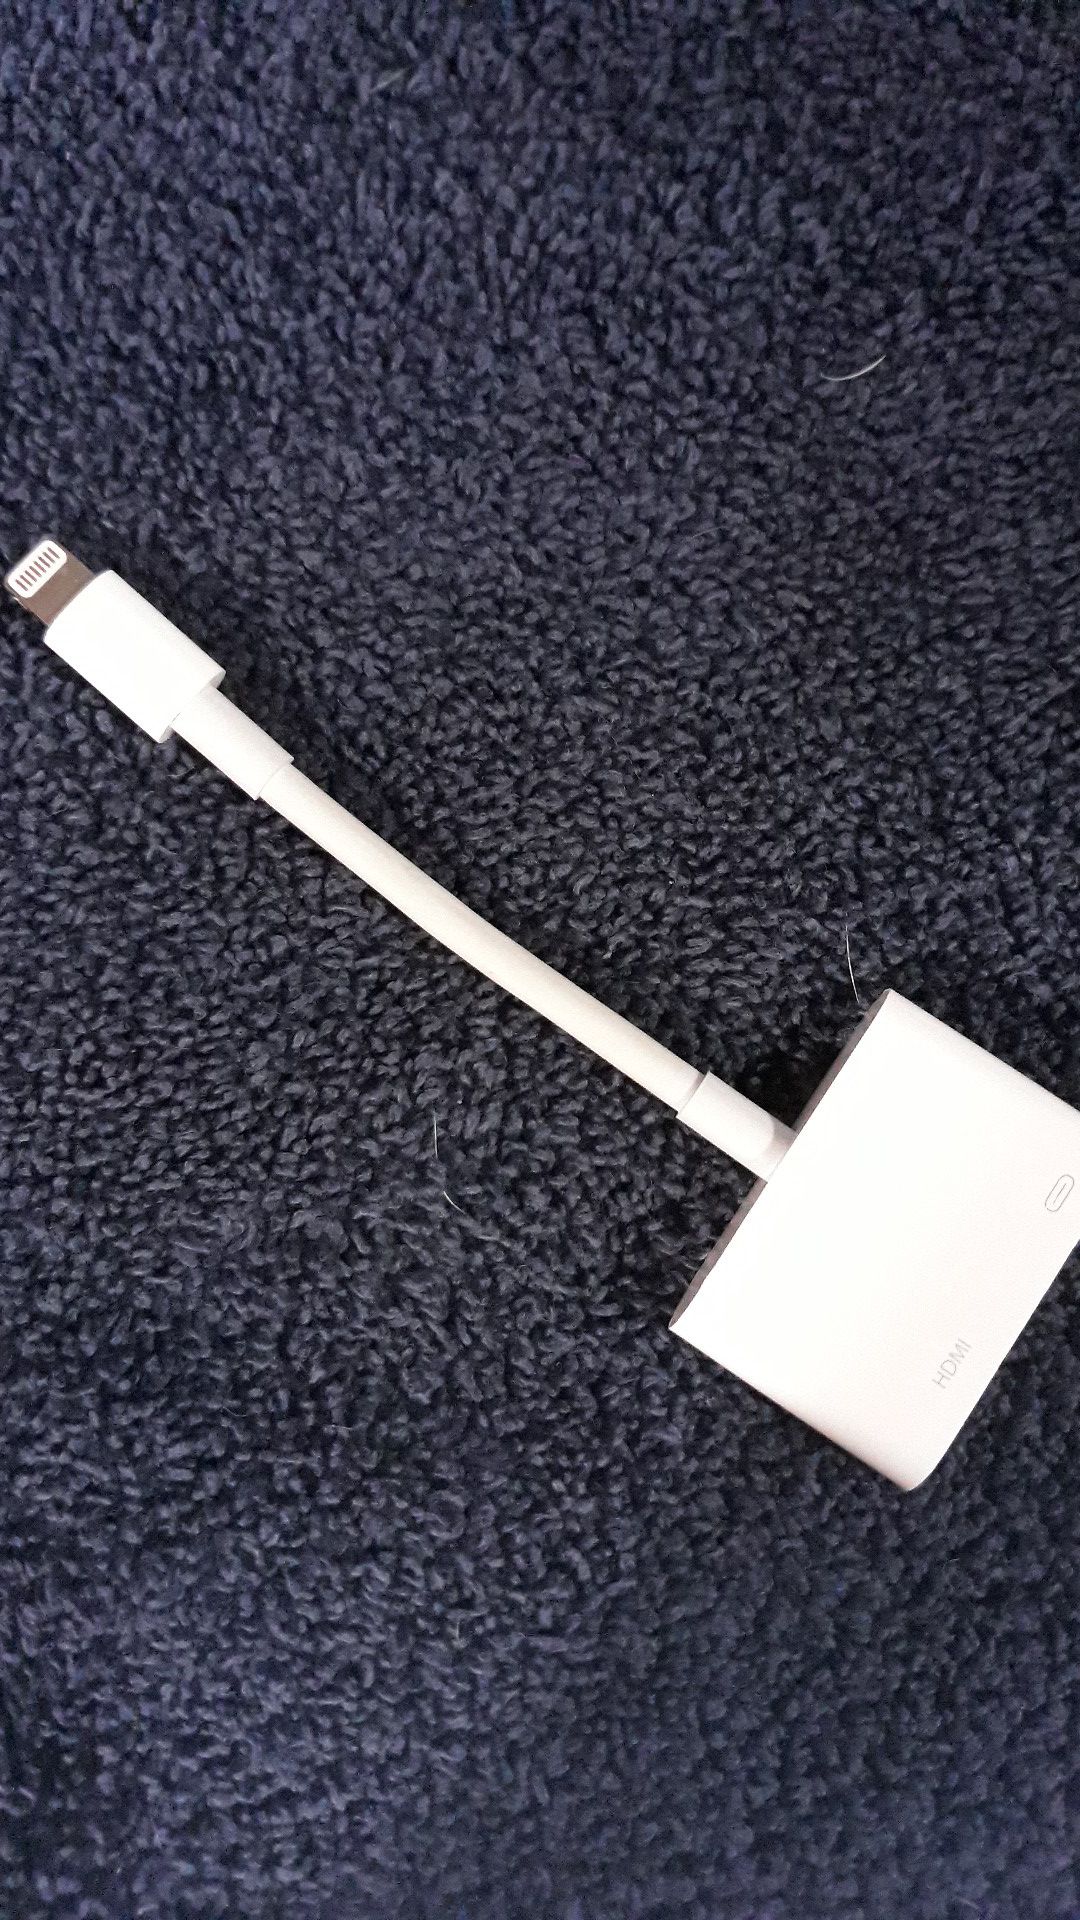 Iphone hdmi adapter